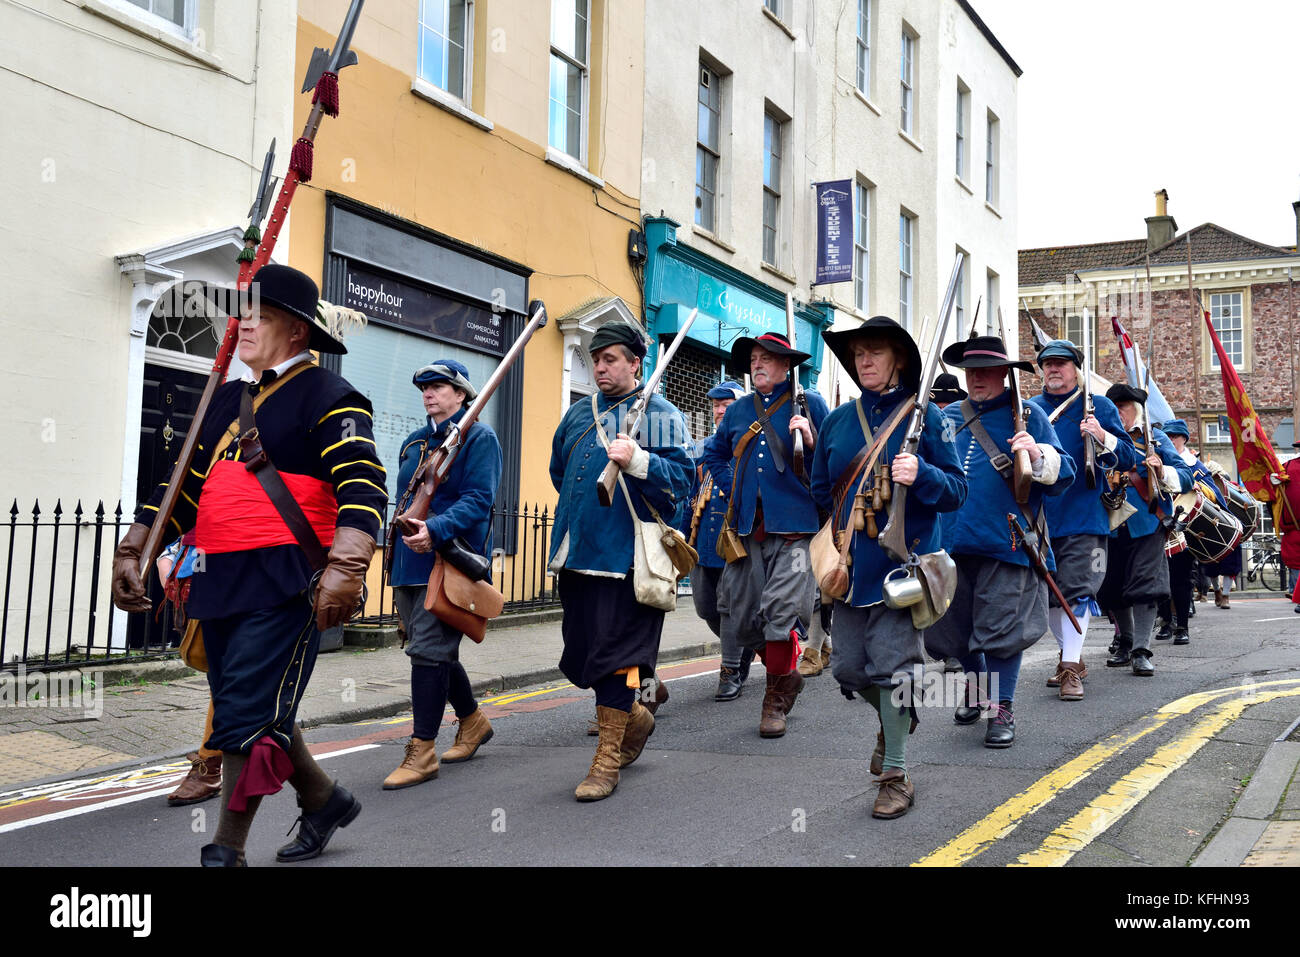 Bristol, UK. 29th Oct, 2017. During the English Civil War, 374 years ago, the attacking Royalists broke through the Parliamentarian outer Bristol defences and stormed down Christmas Steps to attack Froome Gate which defended the St. John's entrance to the walled city of Bristol. The re-enactment of this battle is being held over two days, Sat. Sun, 28 and 29 October, 2017 around the streets at the top of Christmas Steps in central Bristol, UK, A ceremony with city dignitaries will be held for a dedication plaque replacement held on the Sunday. Credit: Charles Stirling/Alamy Live News Stock Photo